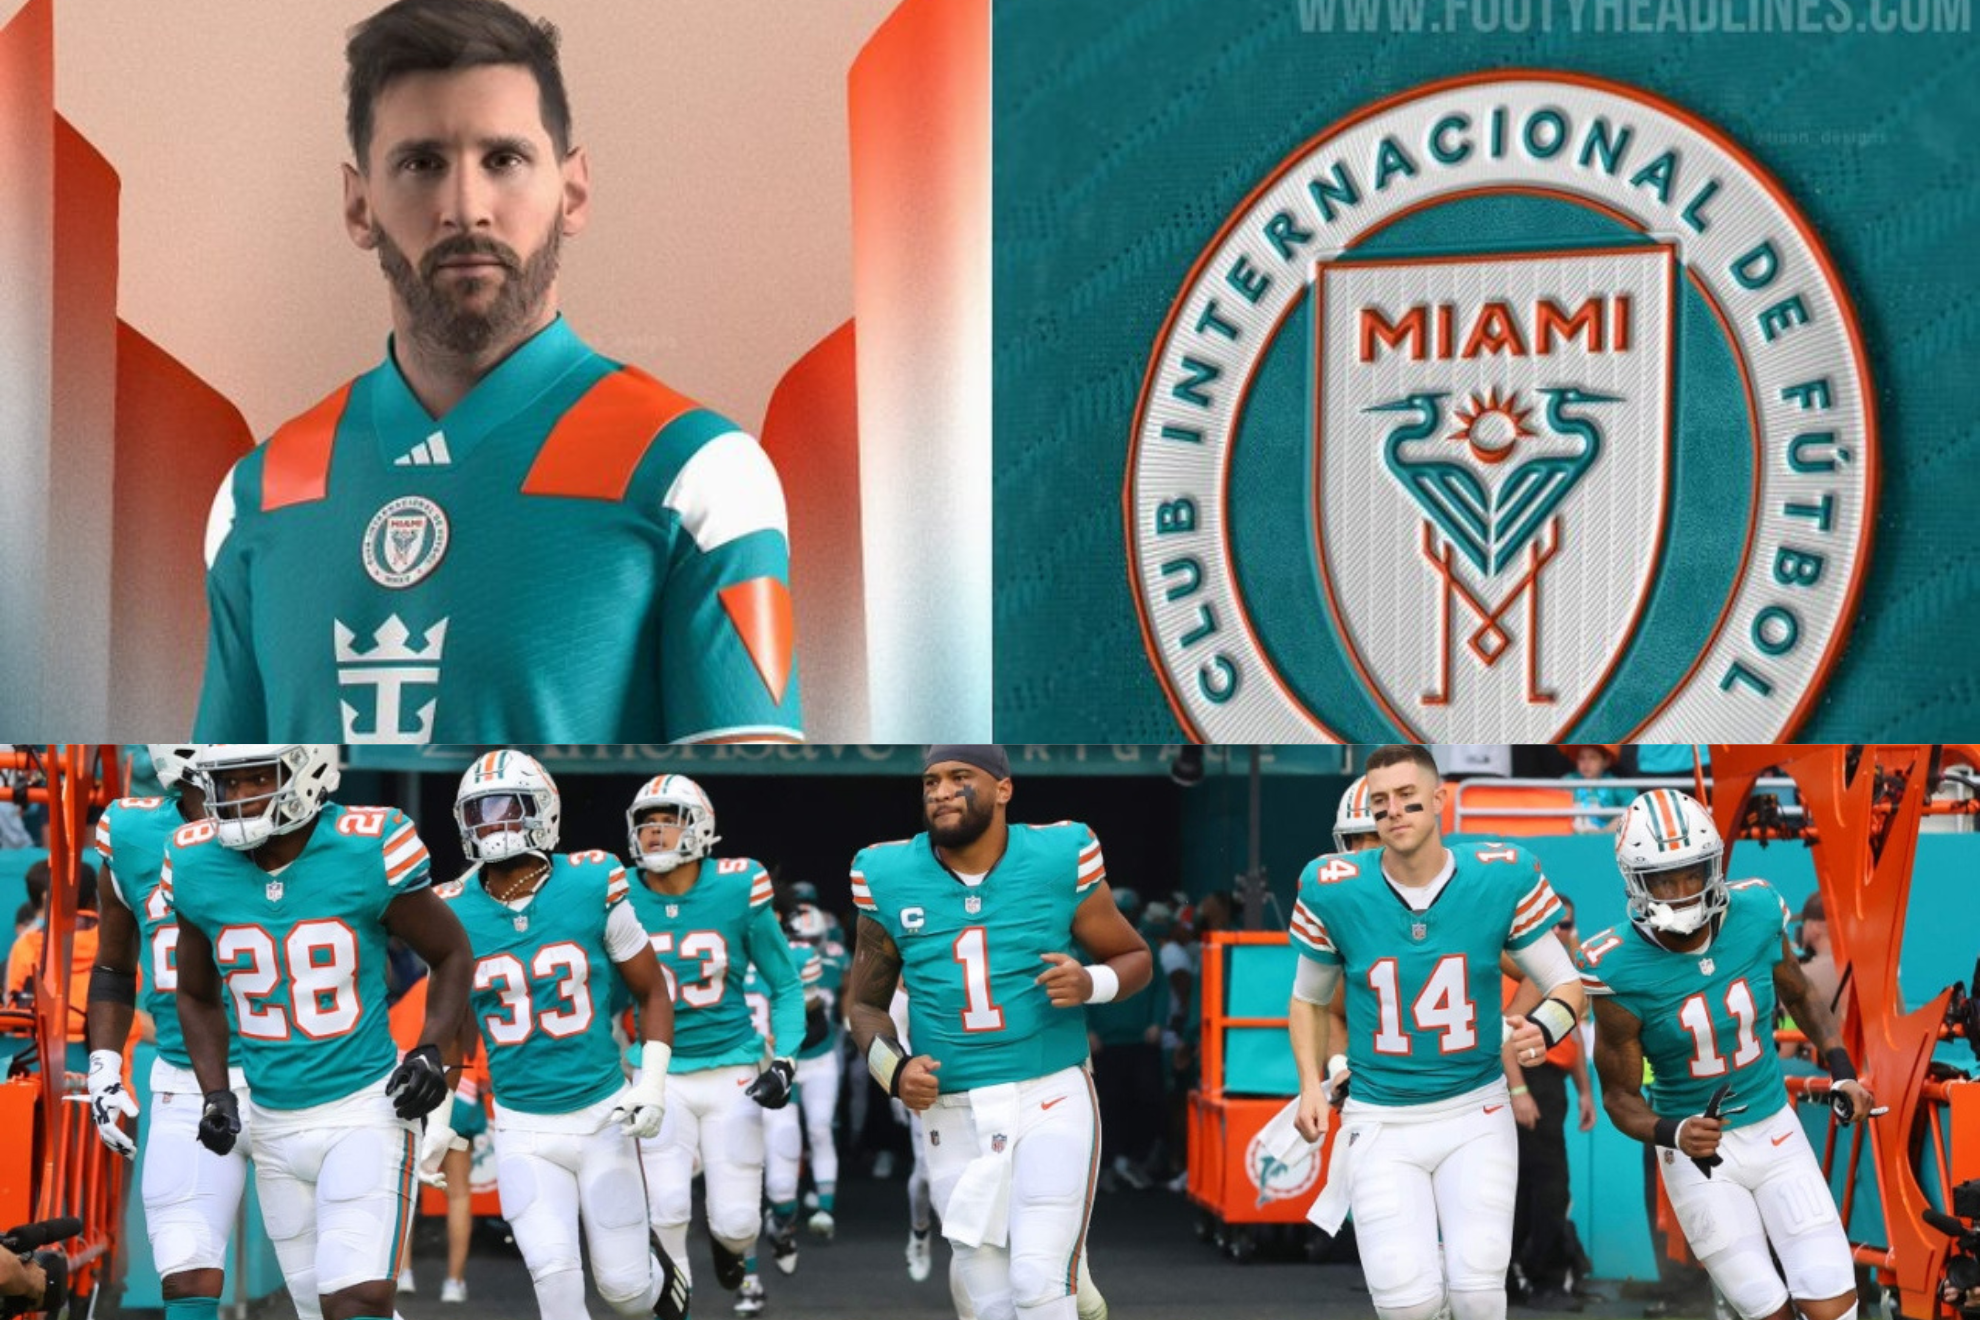 Messis Inter Miami and the Dolphins will drive their fans crazy: What revolutionary idea are they planning?